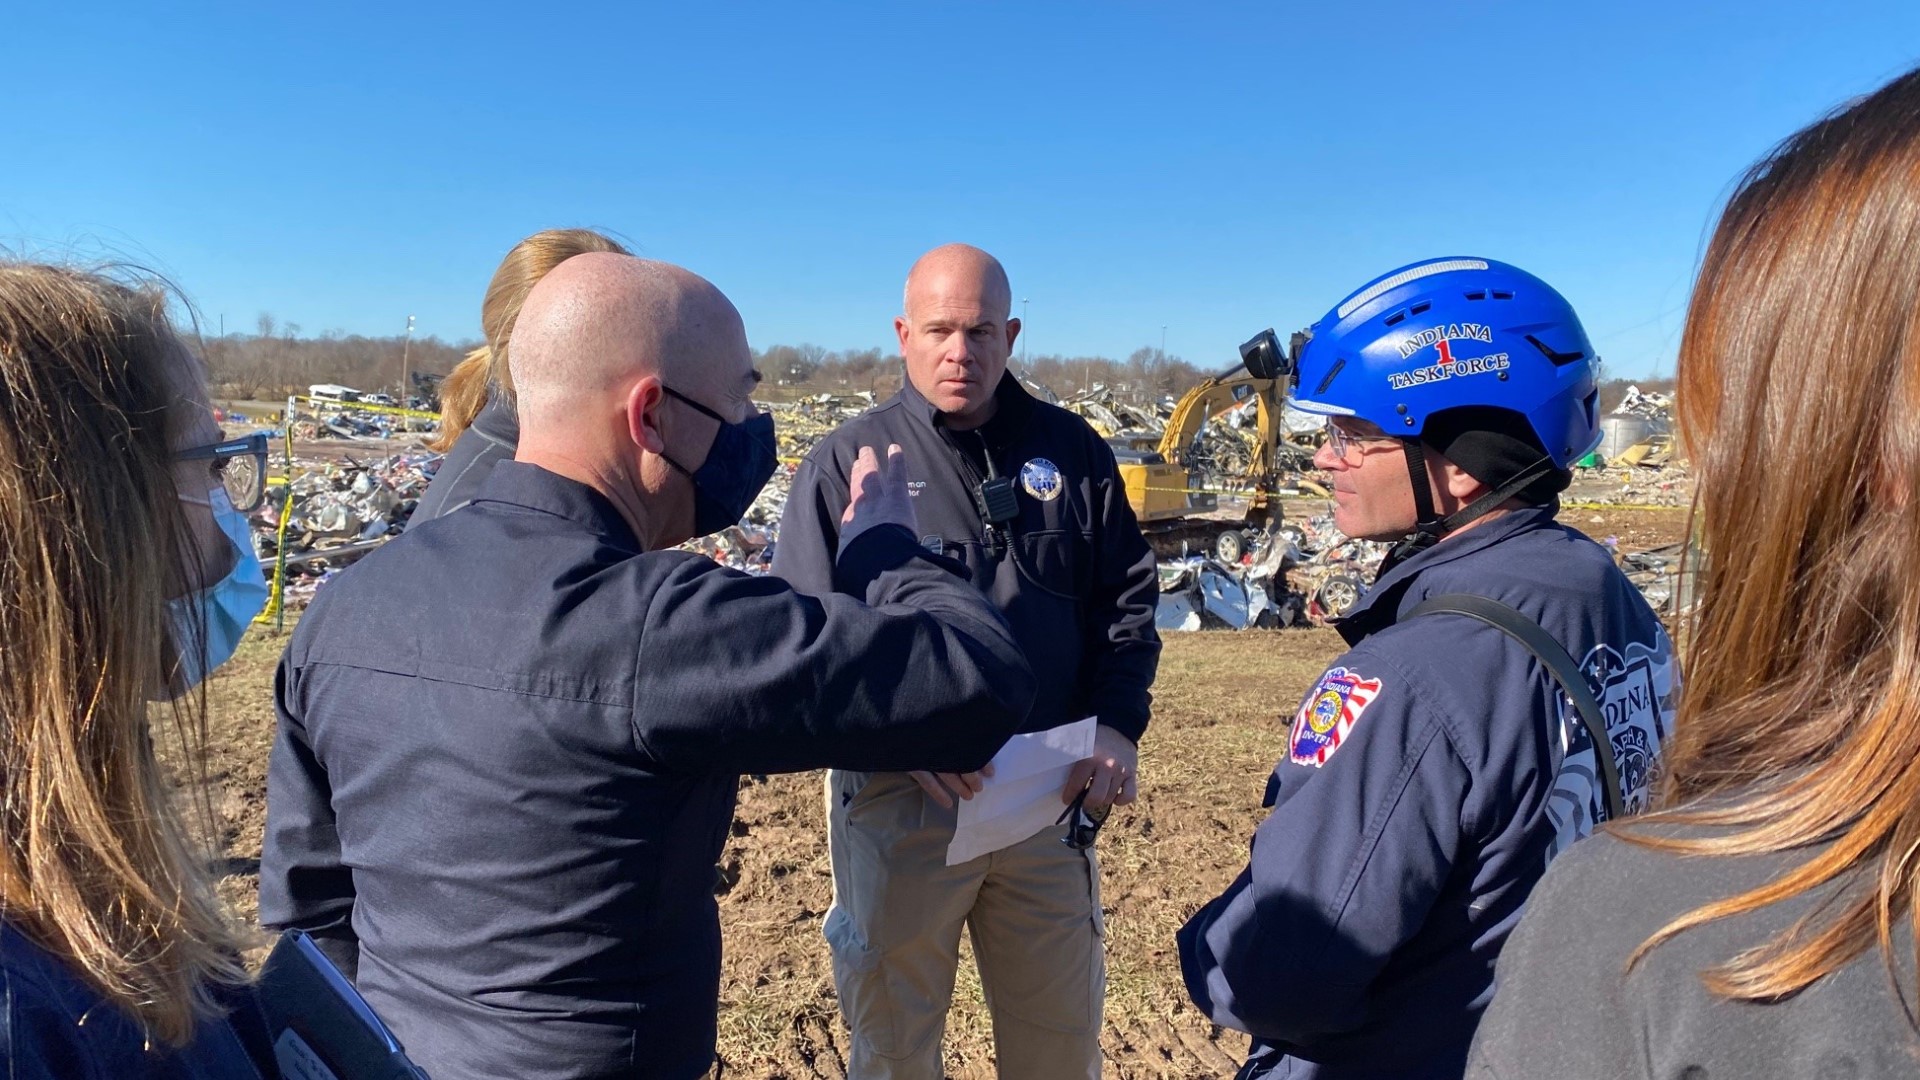 Forty-five members of the Indiana Task Force 1 traveled to Mayfield, Kentucky to help with relief efforts in one of the areas hit the hardest by tornadoes.